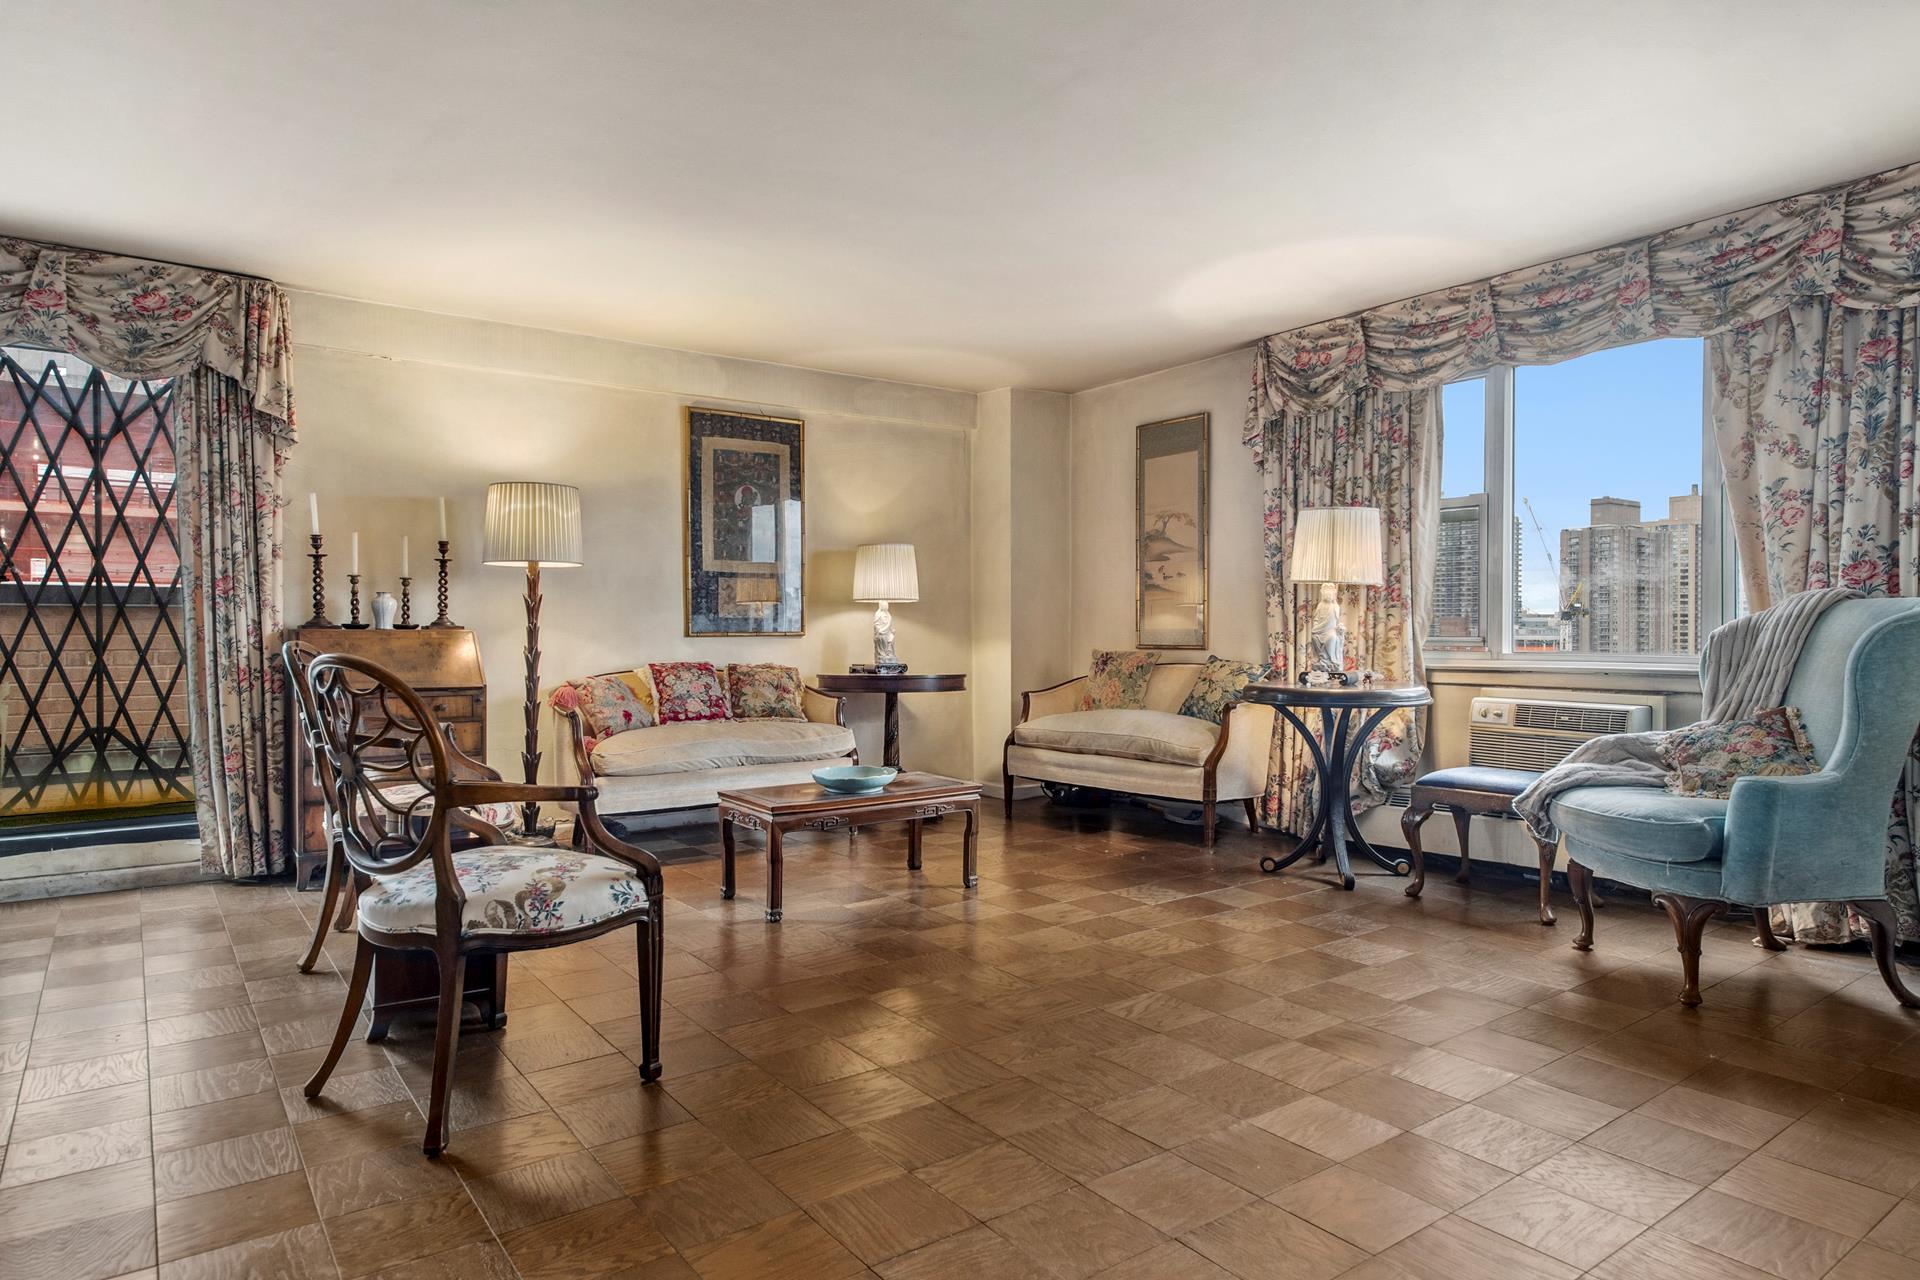 333 East 79th Street Phy, Yorkville, Upper East Side, NYC - 3 Bedrooms  
3 Bathrooms  
6 Rooms - 